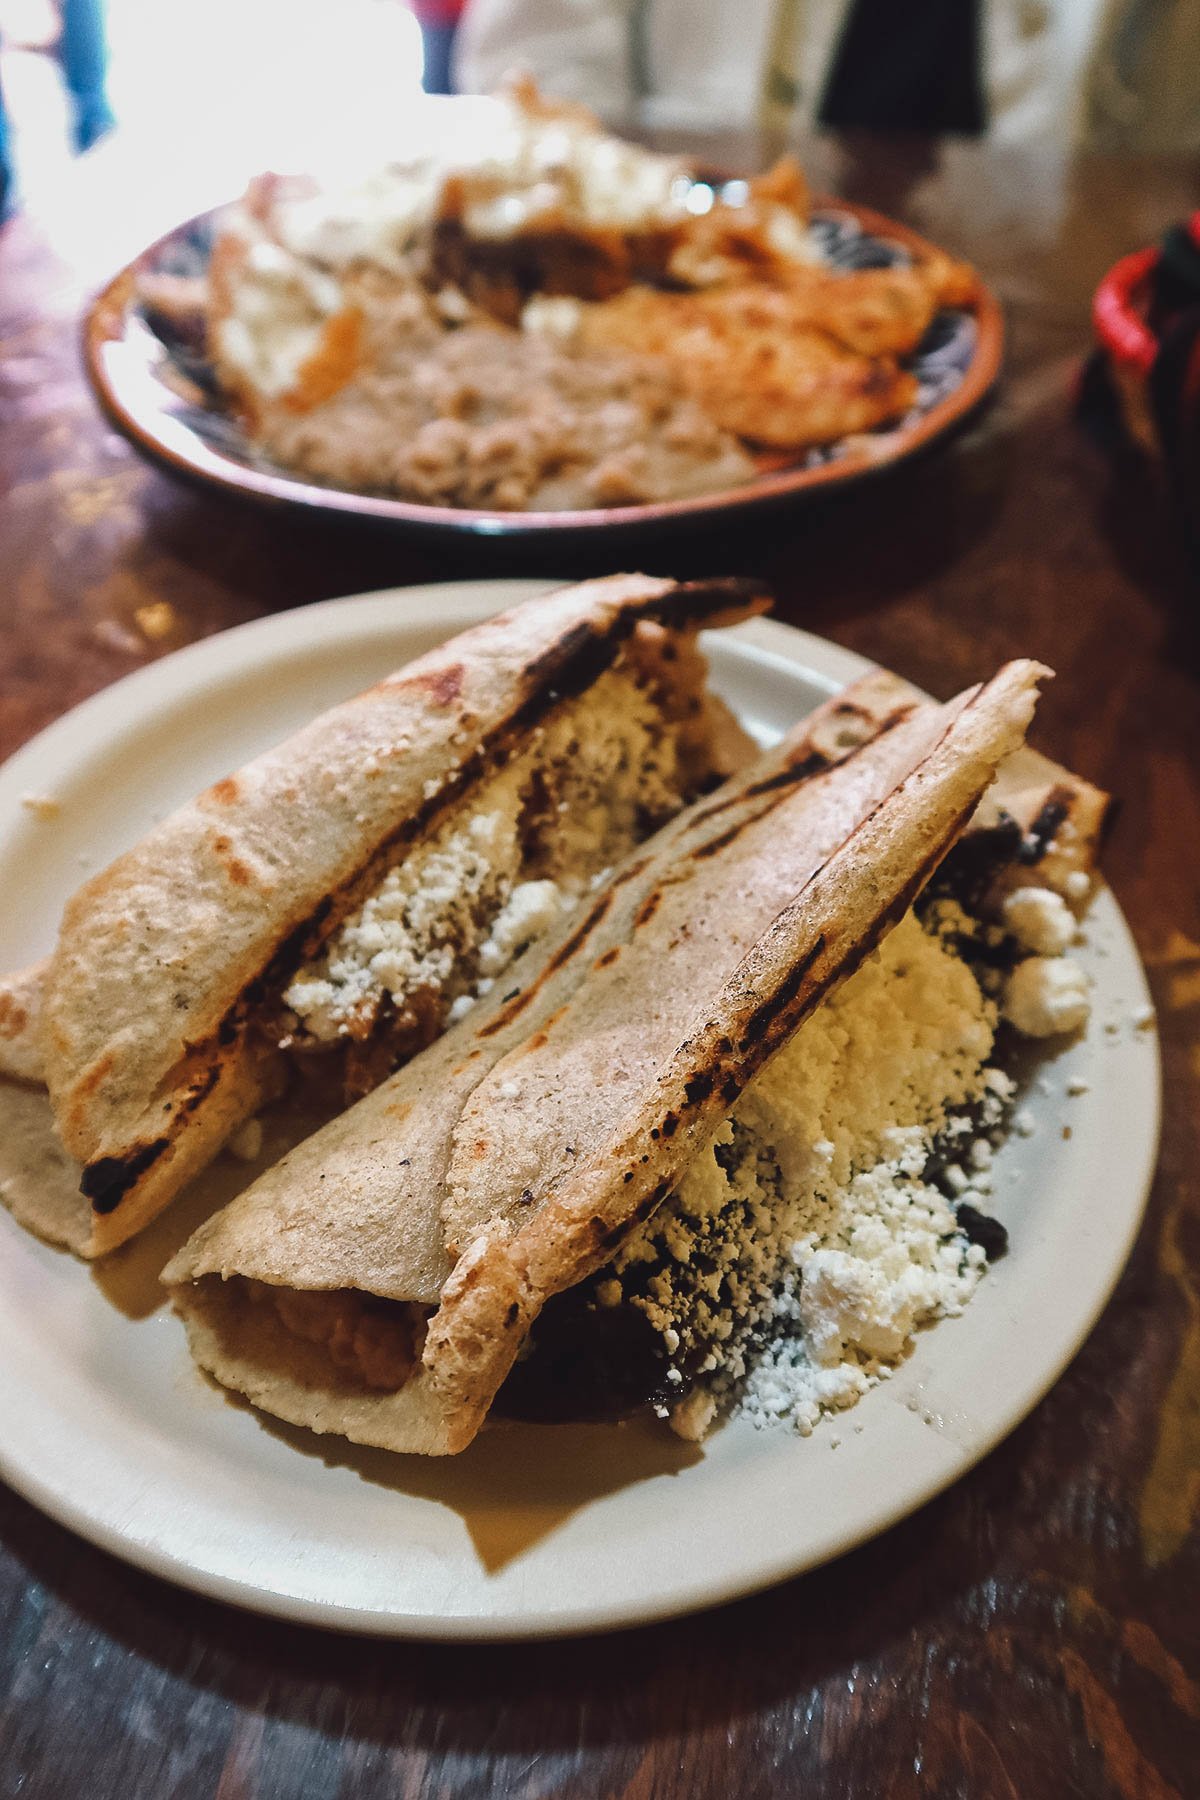 Tlacoyos at a restaurant in Guanajuato